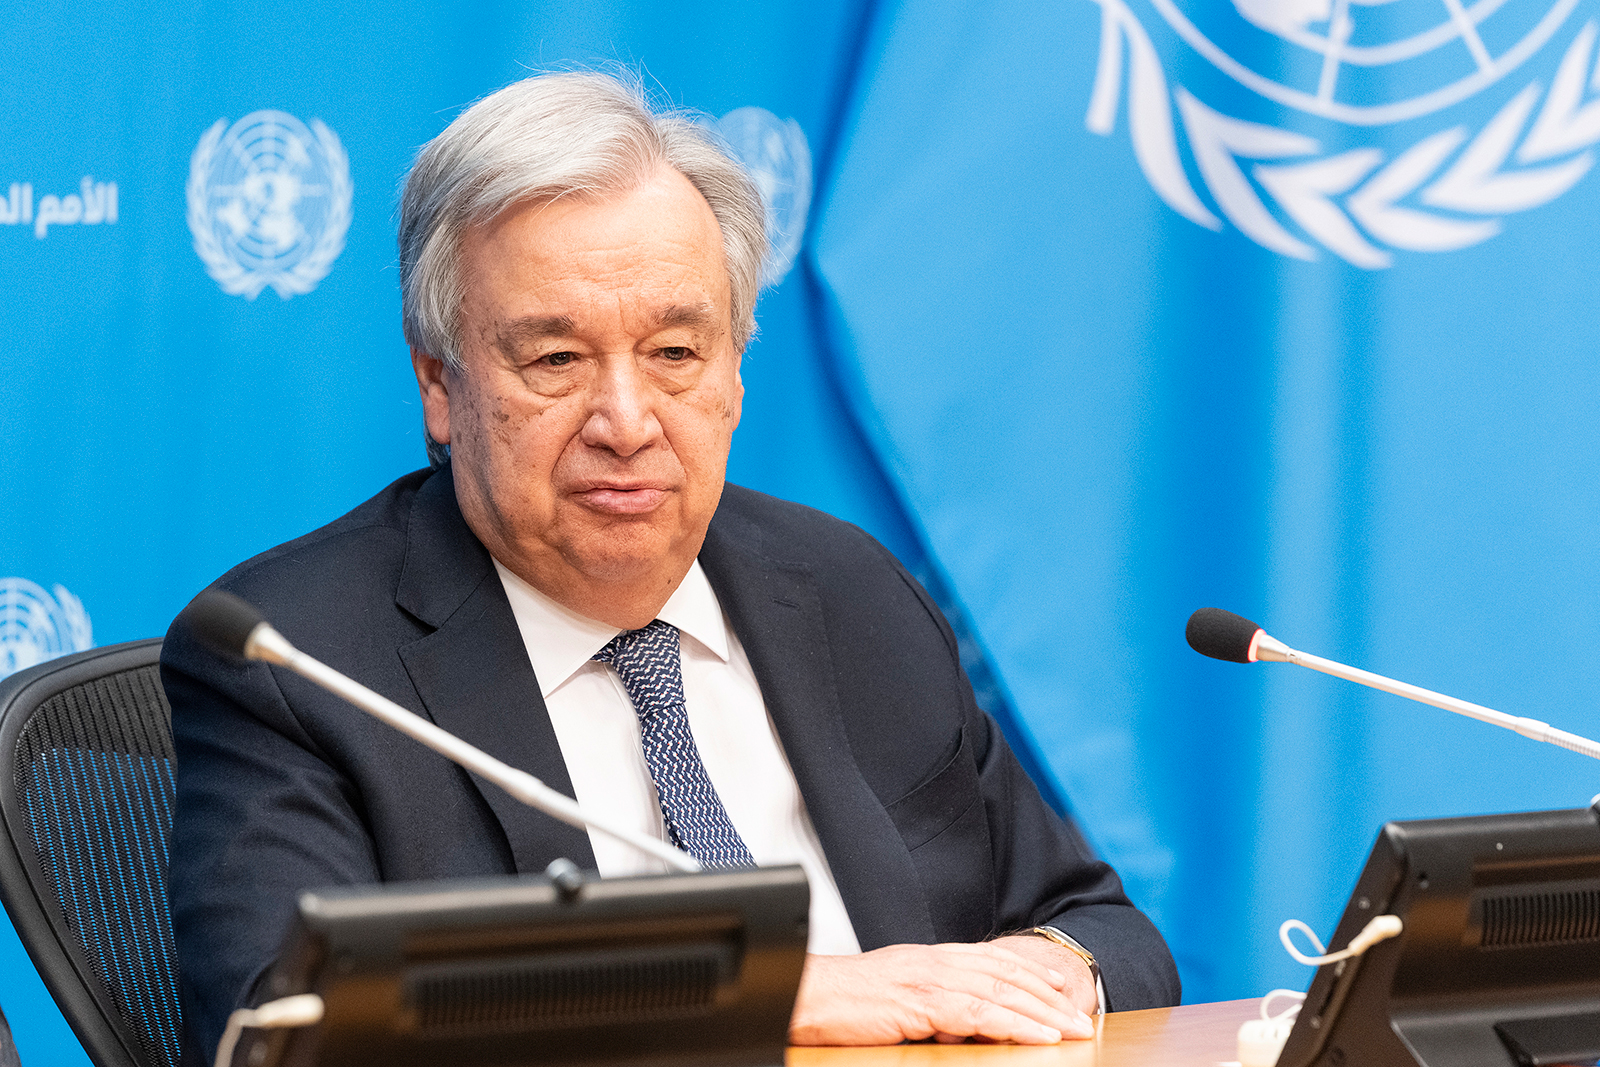 Antonio Guterres speaks during joint press briefing at the United Nations Headquarters in New York on November 28.